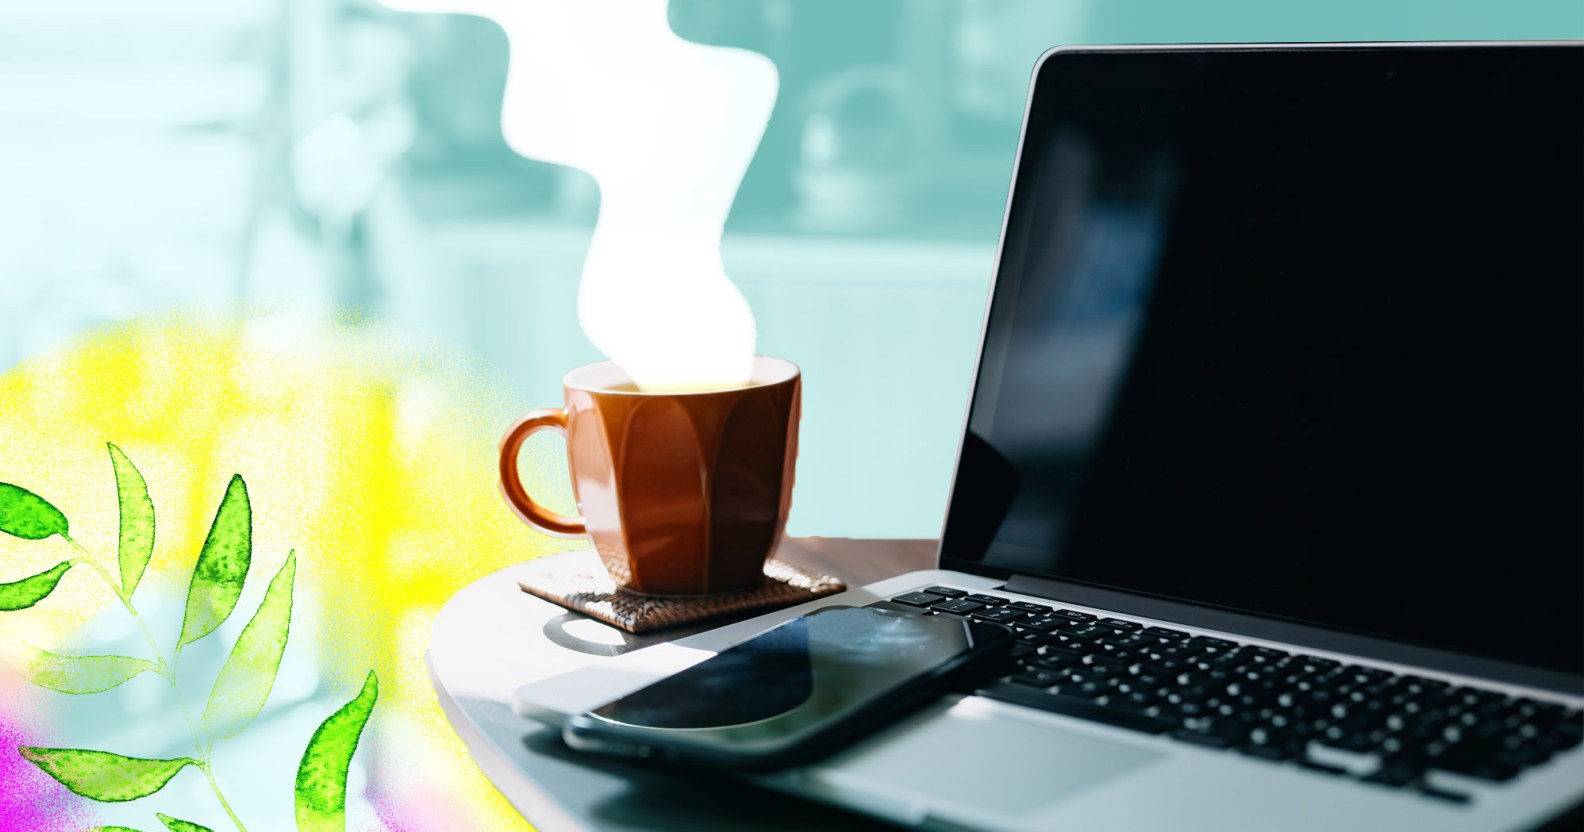 A steaming cup of coffee sits next to an open laptop and mobile phone.